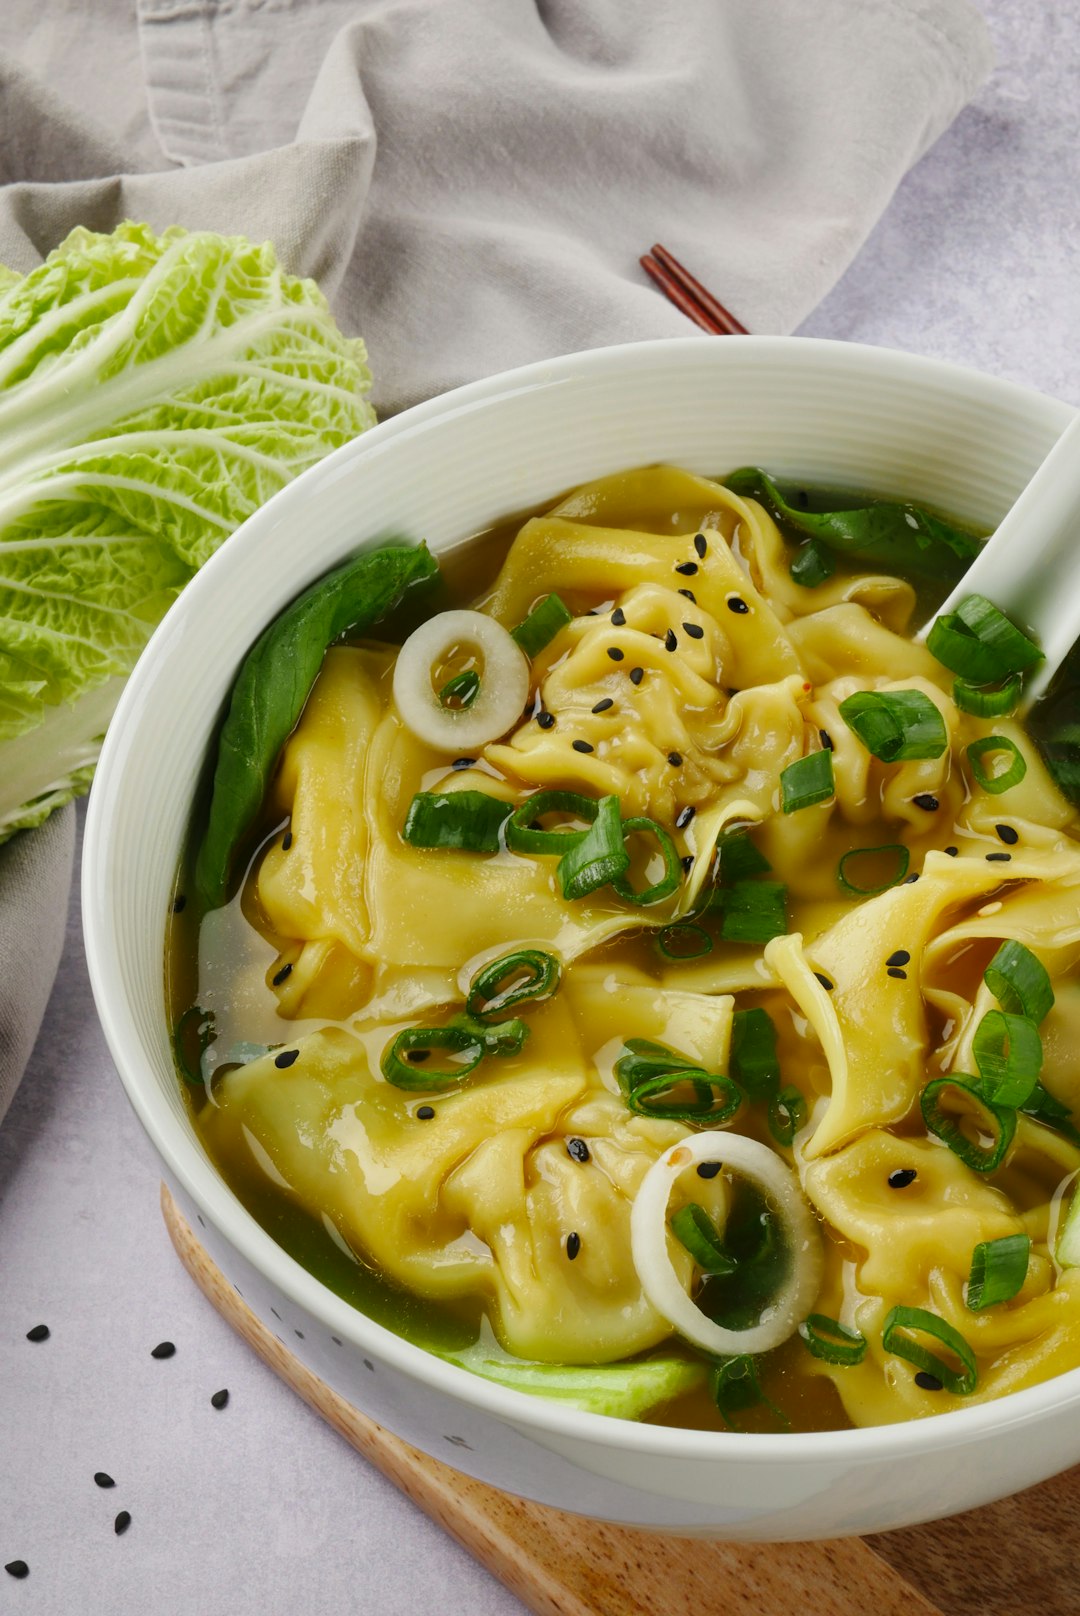 Ang's Creamy Tortellini Soup